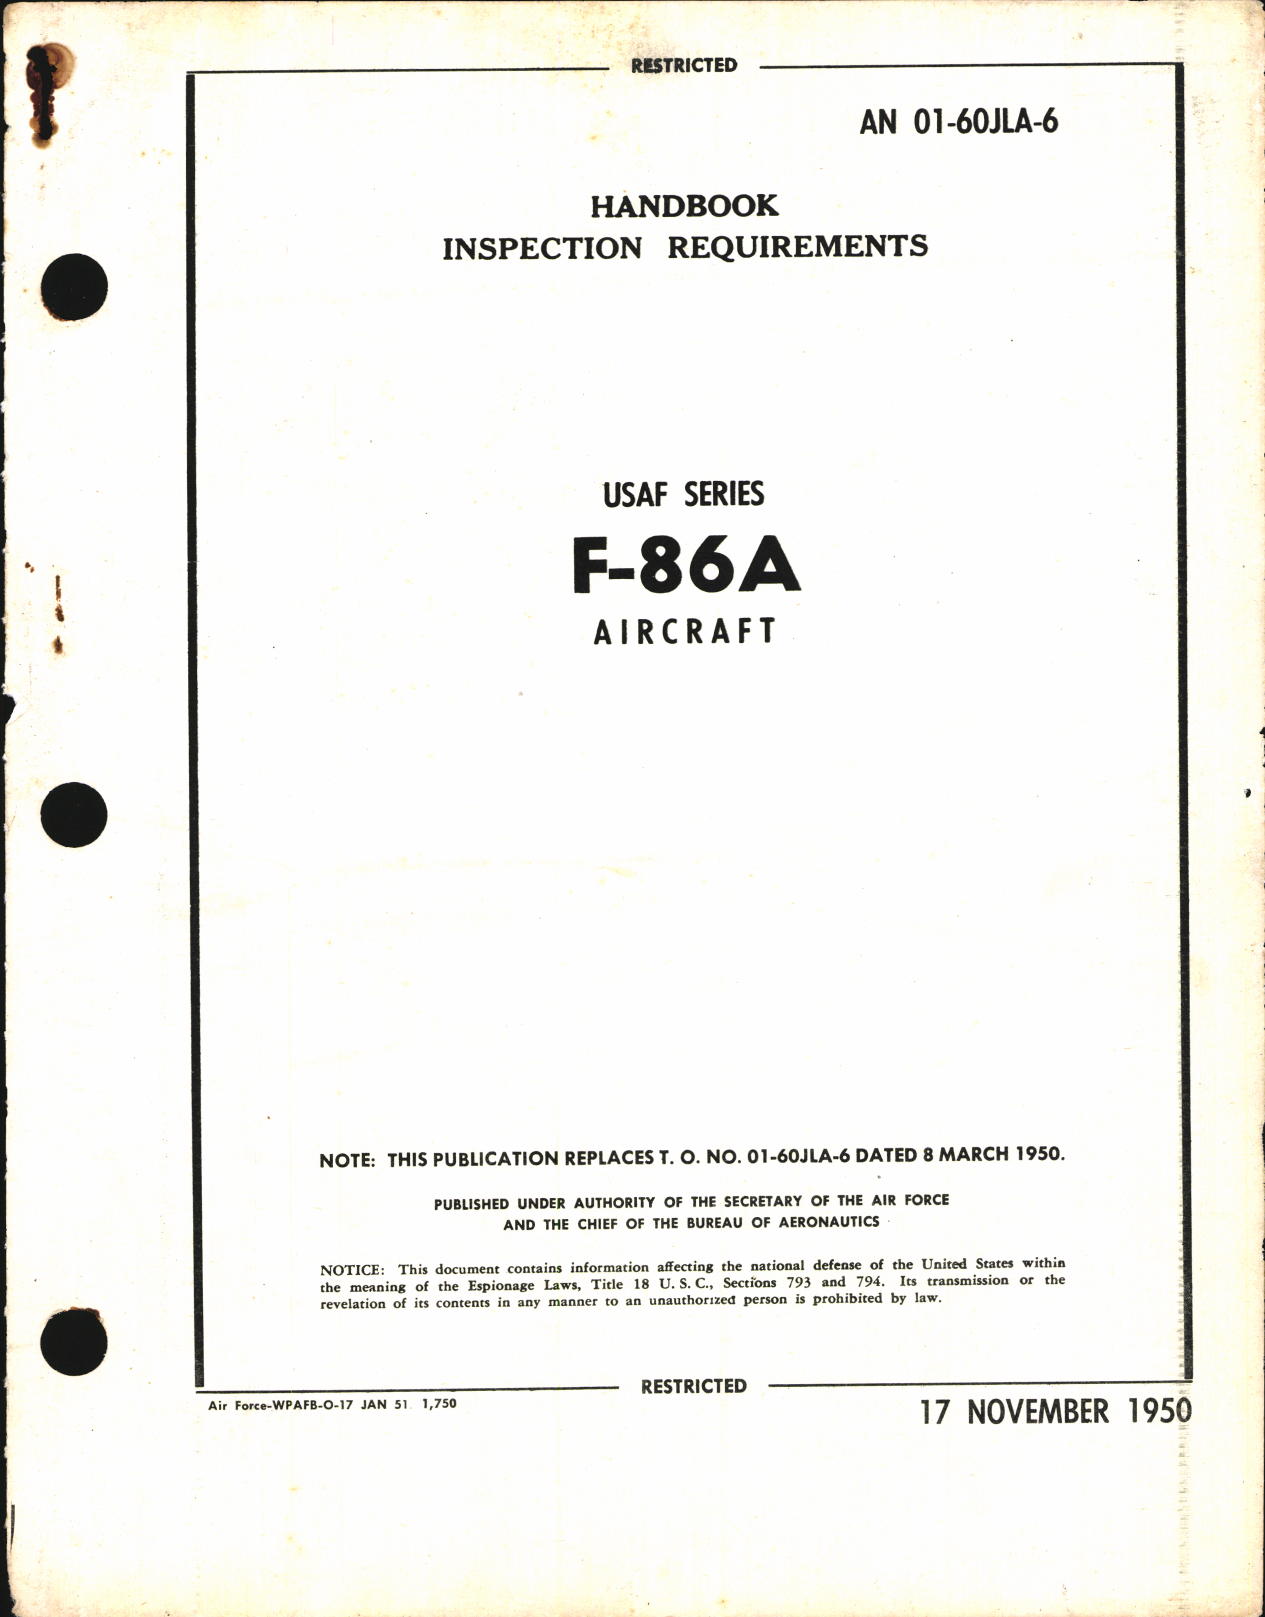 Sample page 1 from AirCorps Library document: Inspection Requirements for F-86A Aircraft